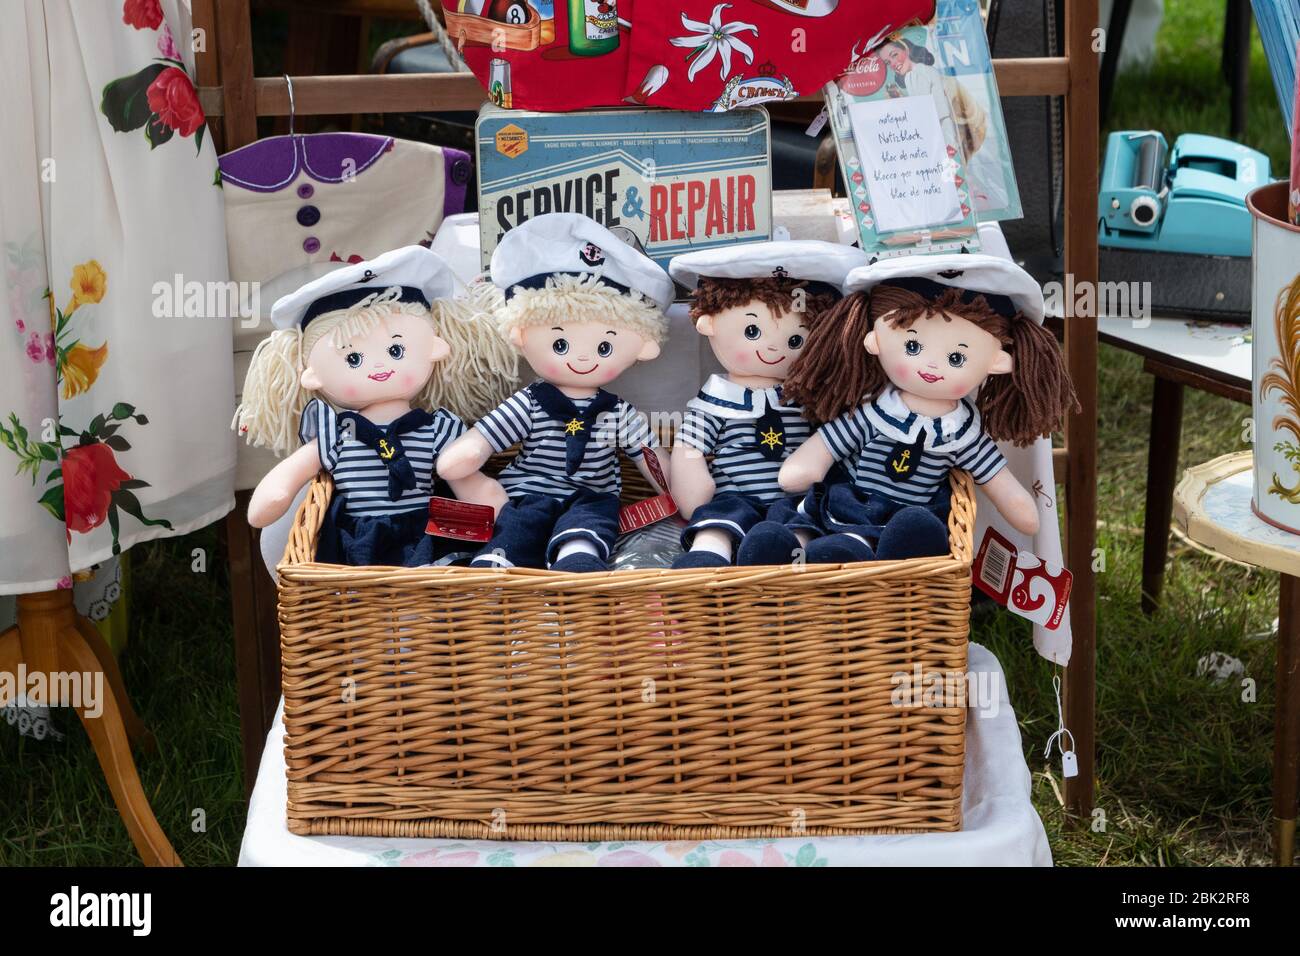 A willow basket hamper containing 4 mop head dolls dressed as sailors.  Displayed for sale at a vintage nostalgia festival. England UK Stock Photo  - Alamy